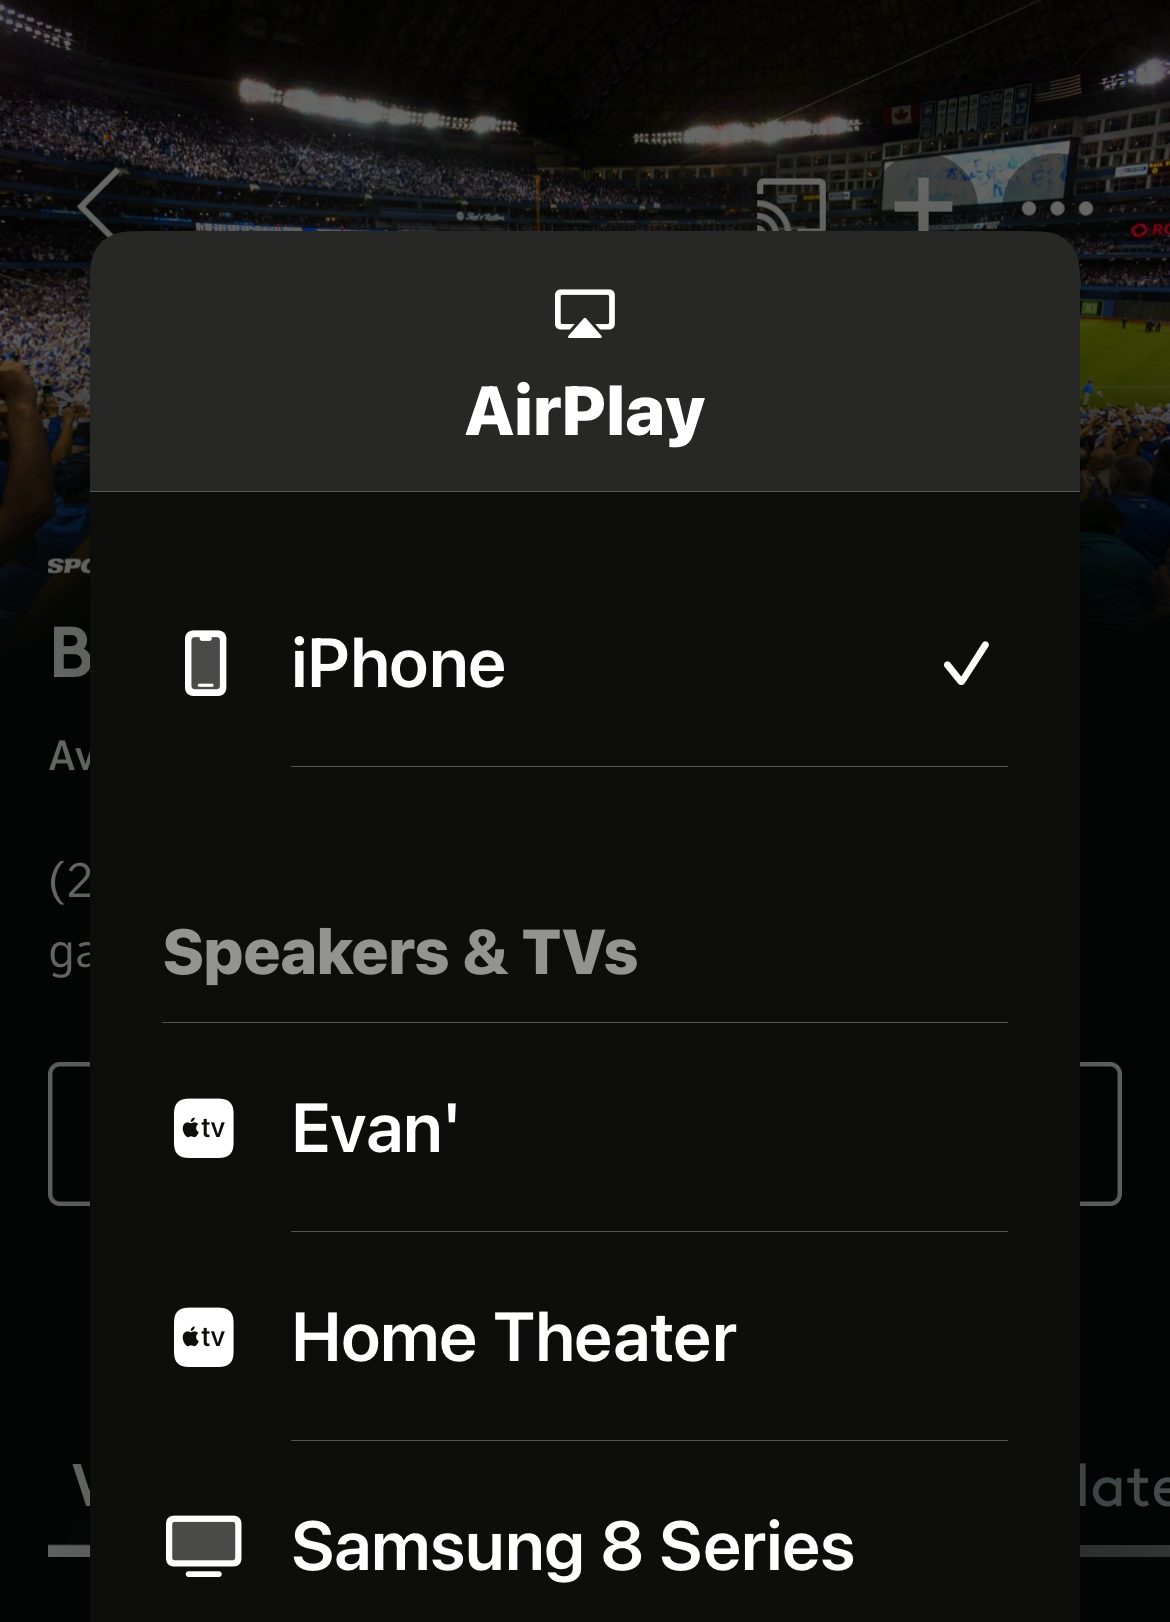 The Ignite TV app open to the AirPlay device list screen.